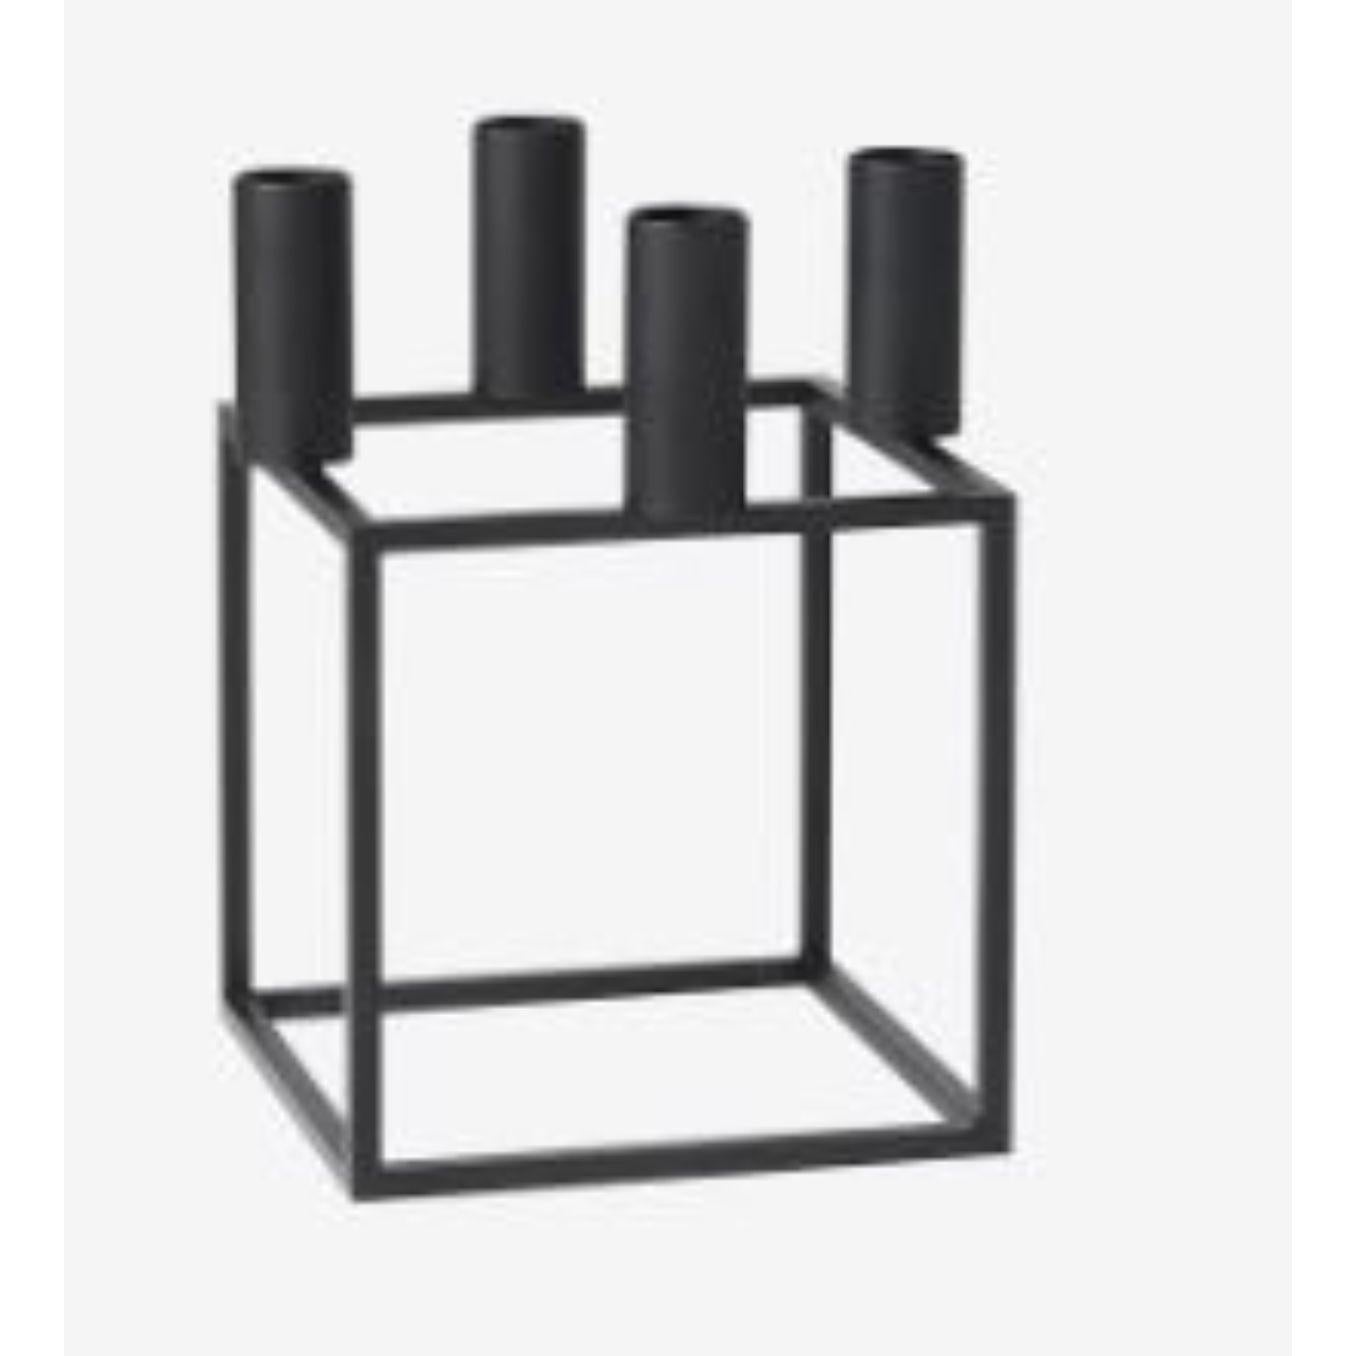 Set of 2 black Kubus and base 4 candle holder by Lassen
Dimensions: D 14 x W 14 x H 20 cm 
Materials: Metal 
Also available in different dimensions. 
Weight: 1.50 Kg

A new small wonder has seen the light of day. Kubus Micro is a stylish,